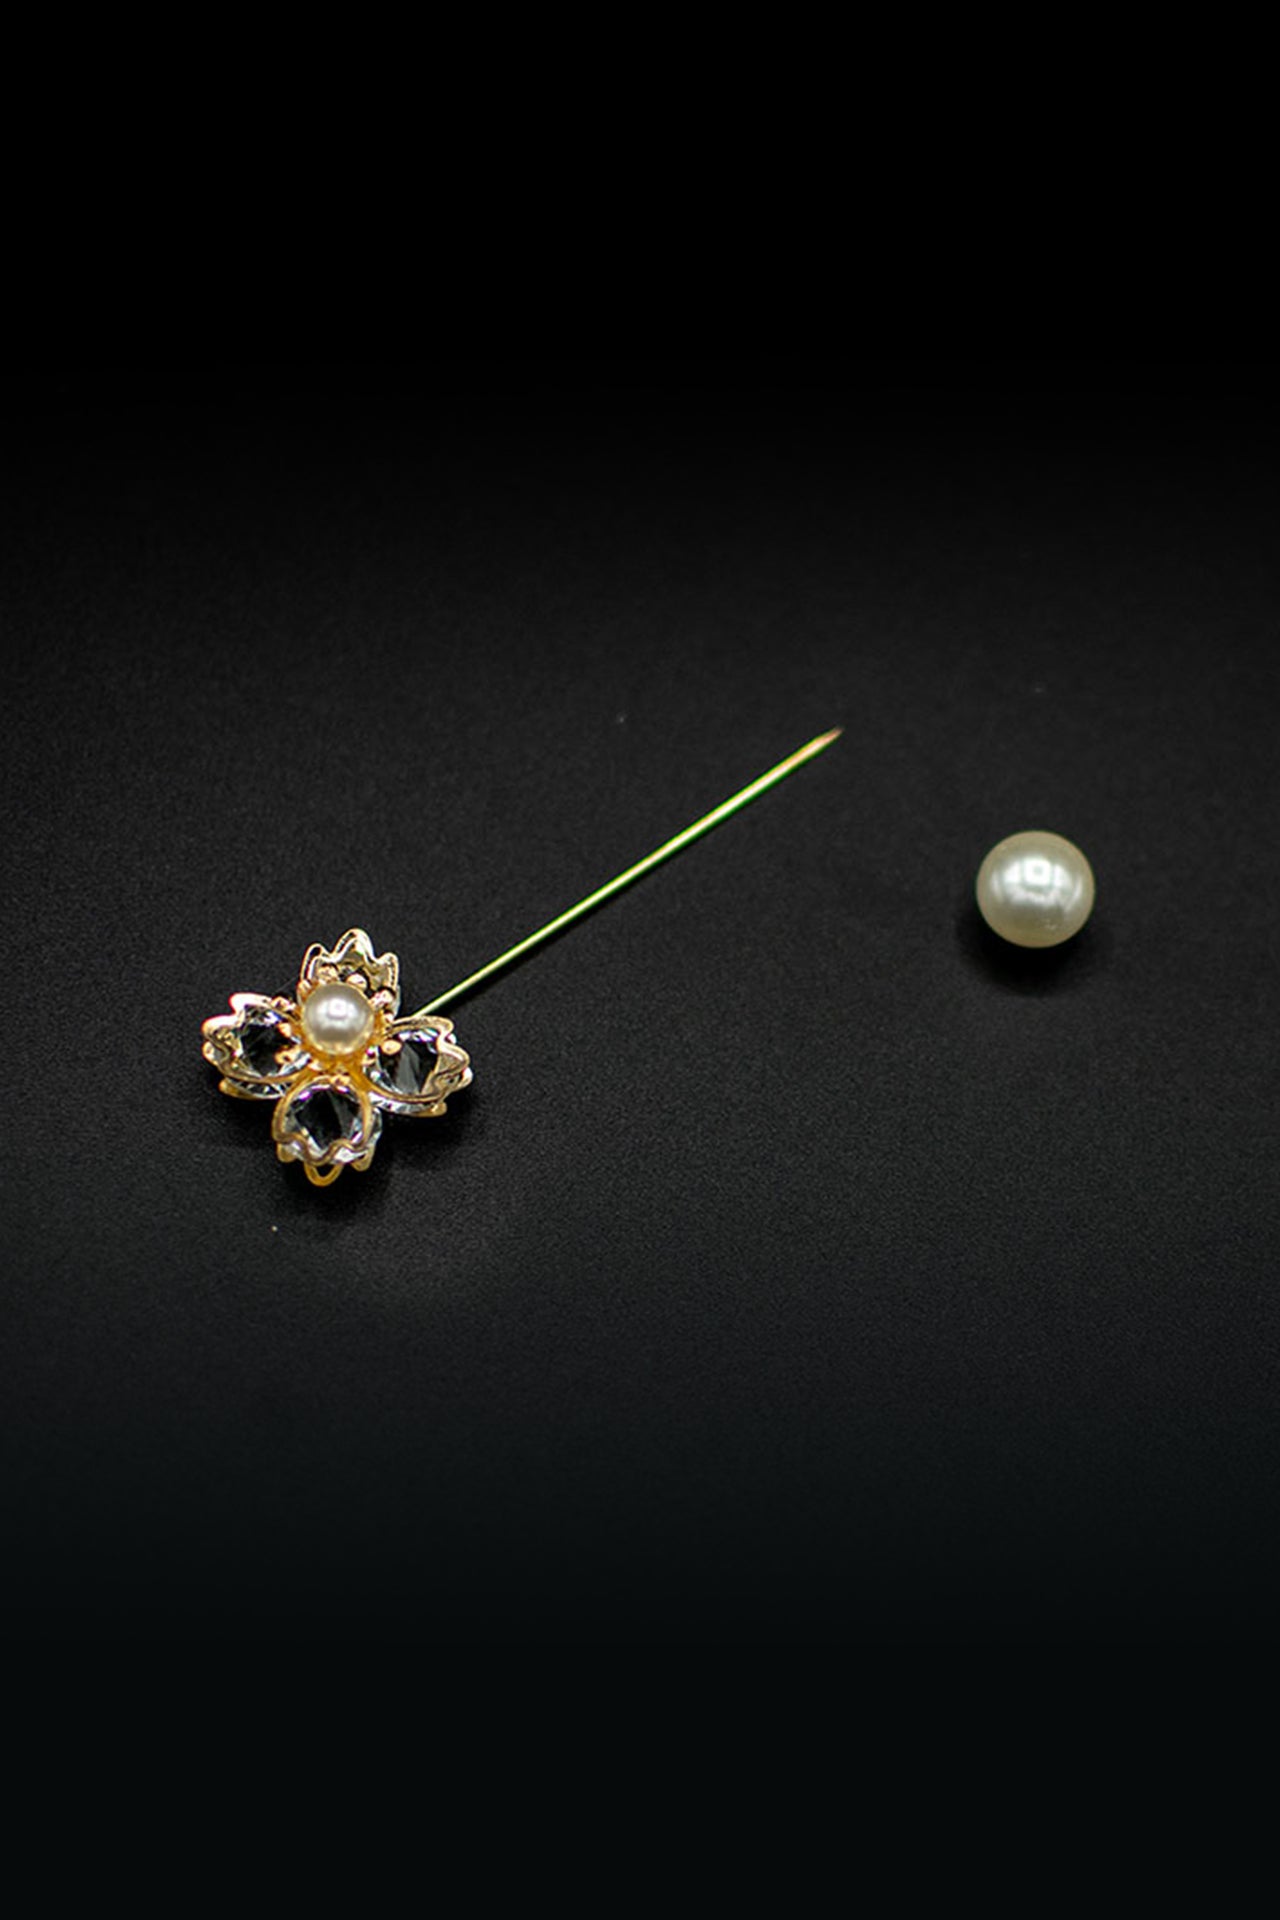 Flowered Pearl Pin